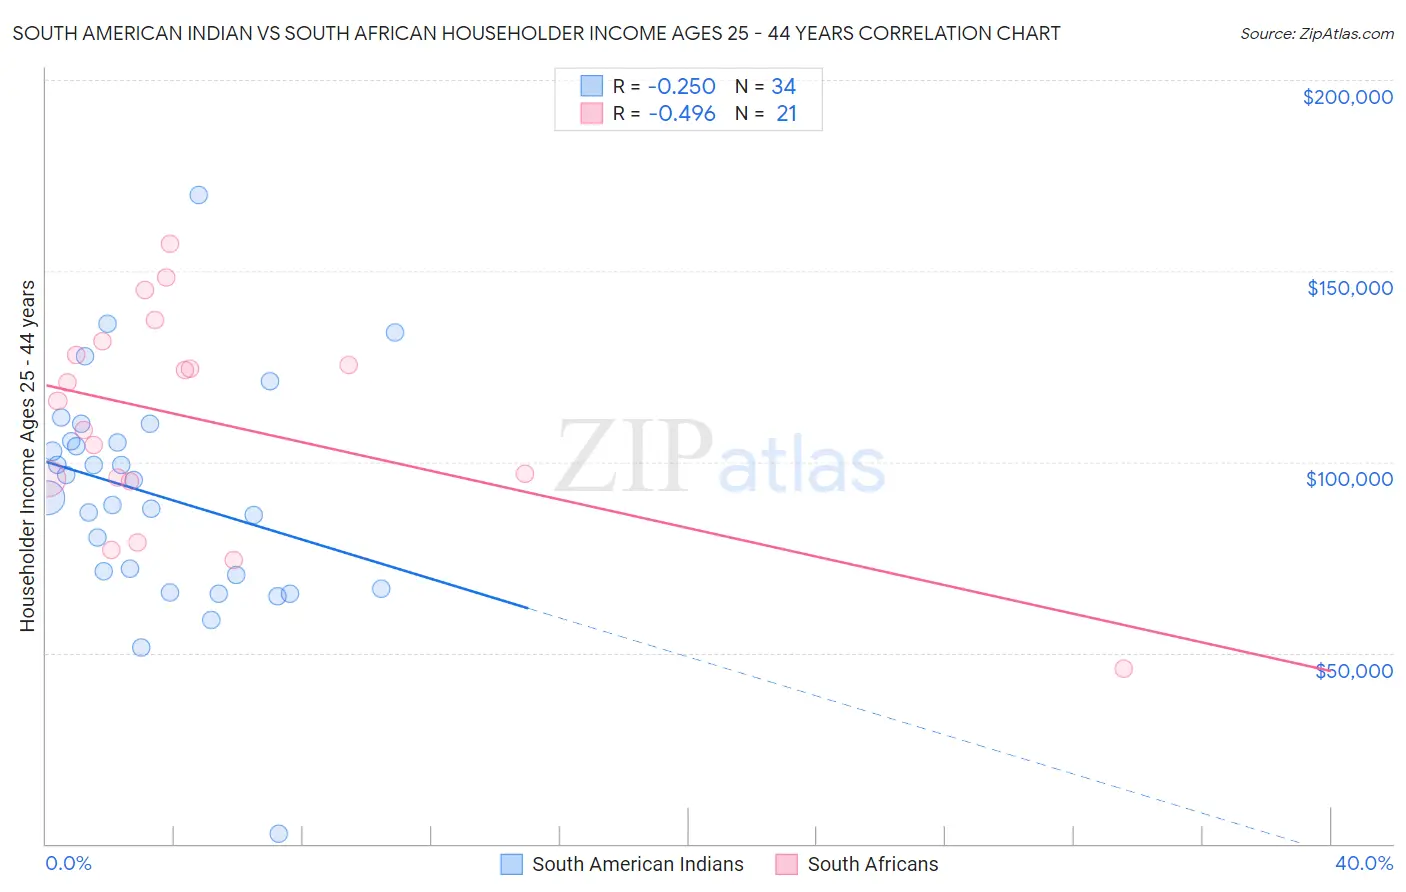 South American Indian vs South African Householder Income Ages 25 - 44 years